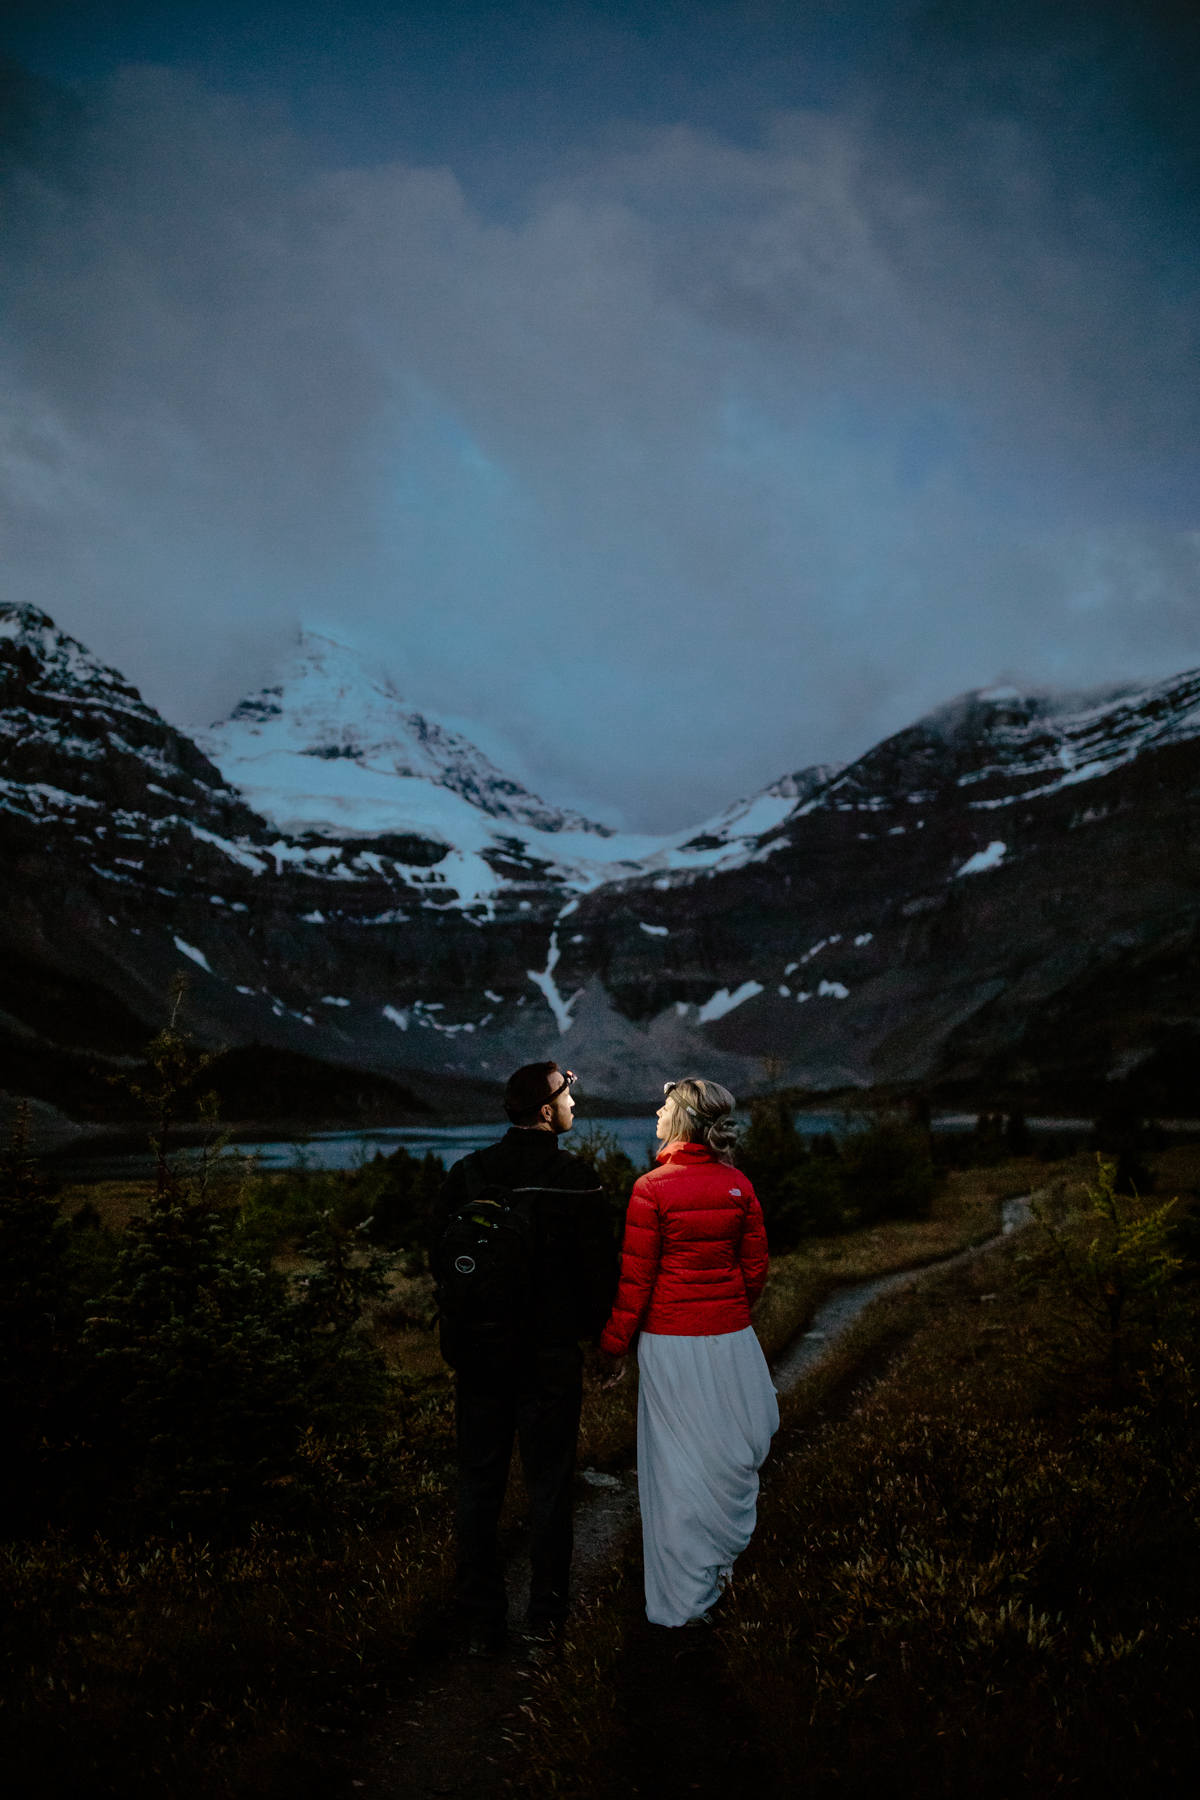 Mount Assiniboine Elopement Photographers at a Backcountry Lodge - Photo 40